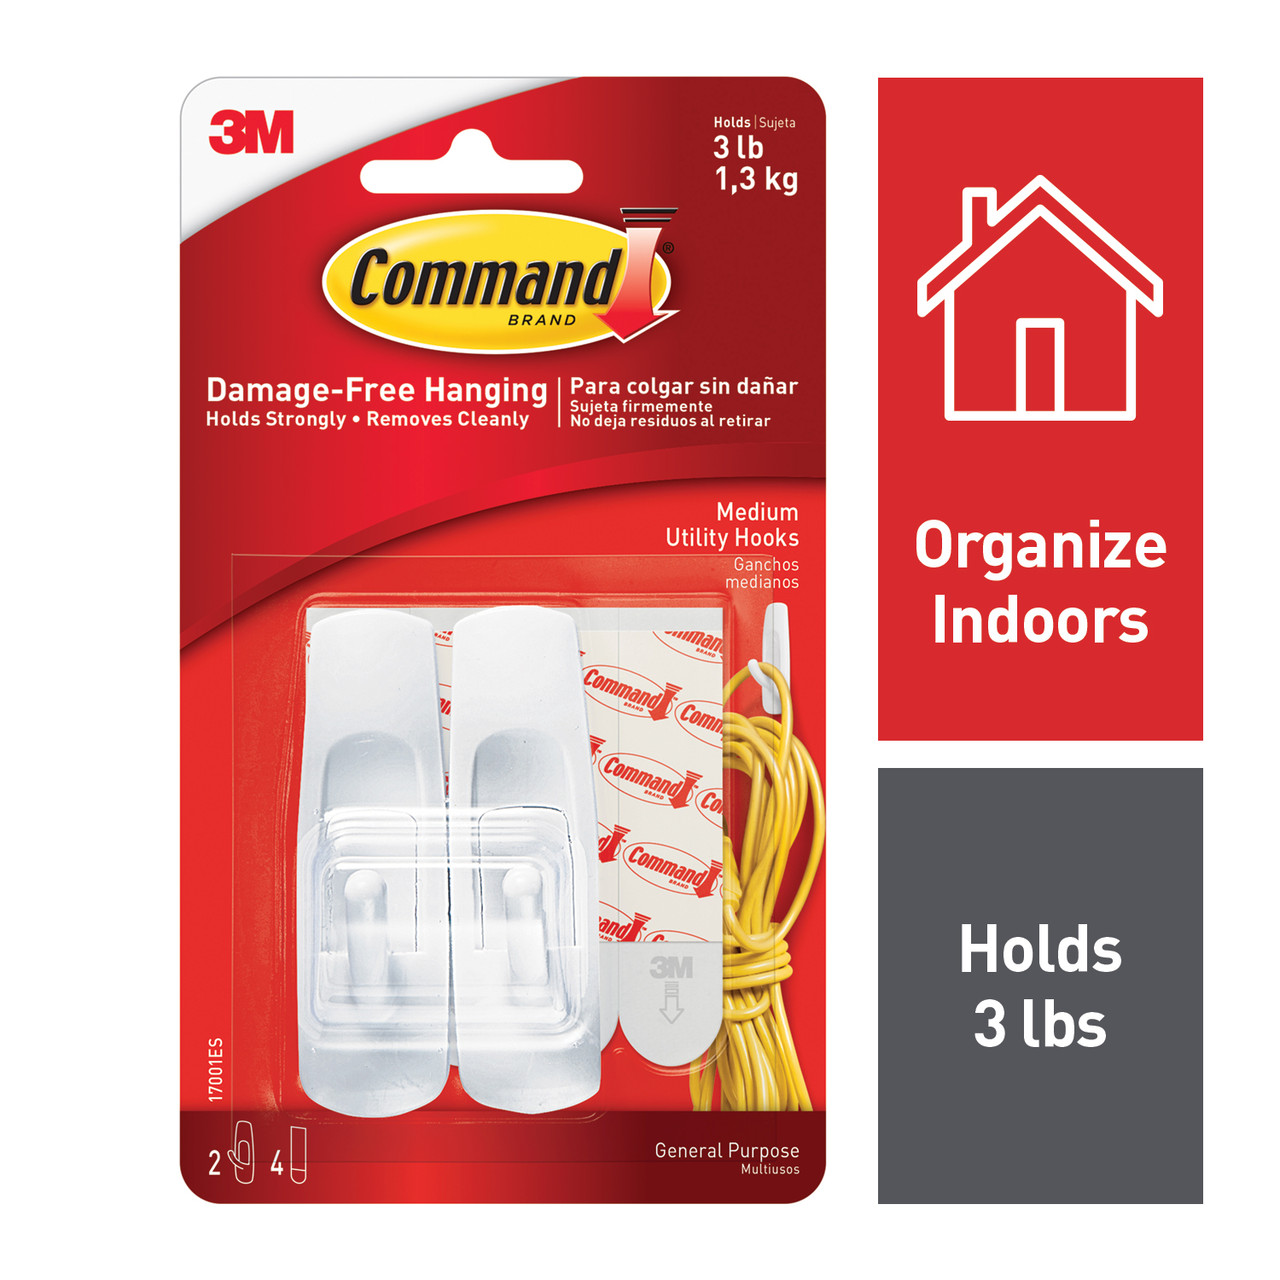 3M™ Command™ Wall Hook, Medium with Strips